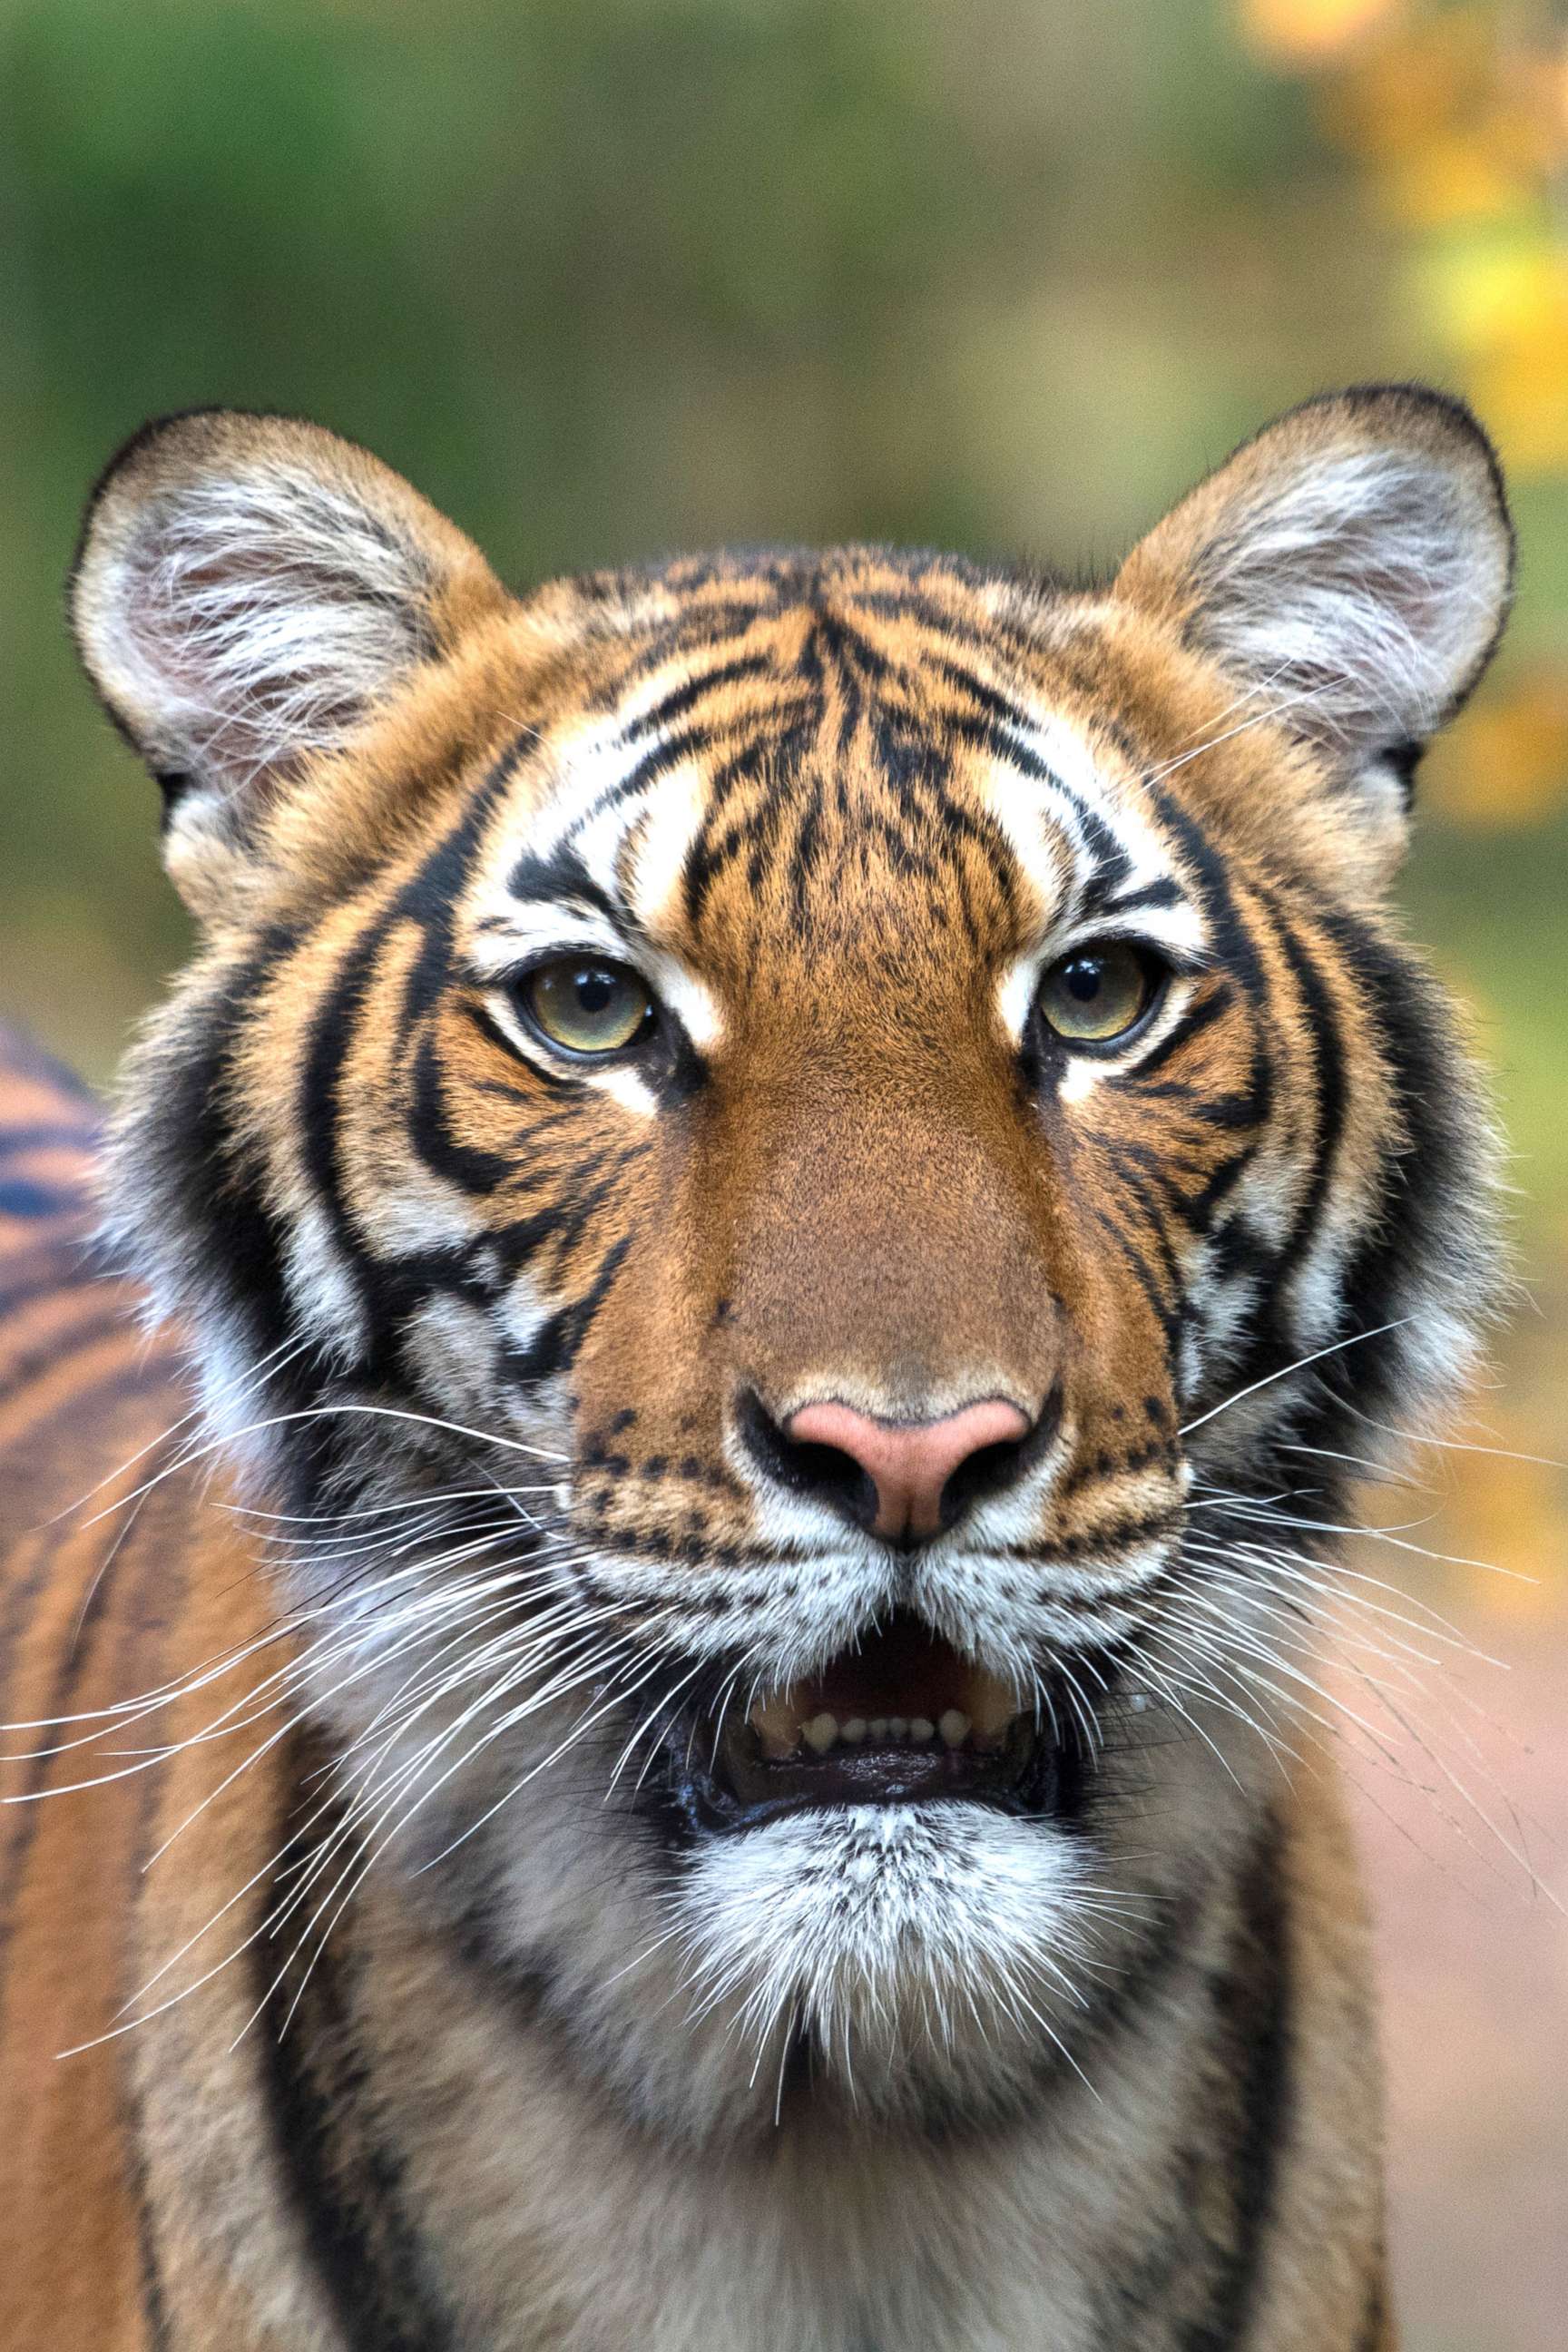 PHOTO: Nadia, a 4-year-old female Malayan tiger at the Bronx Zoo, has tested positive for COVID-19 according to a press release dated April 5, 2020.